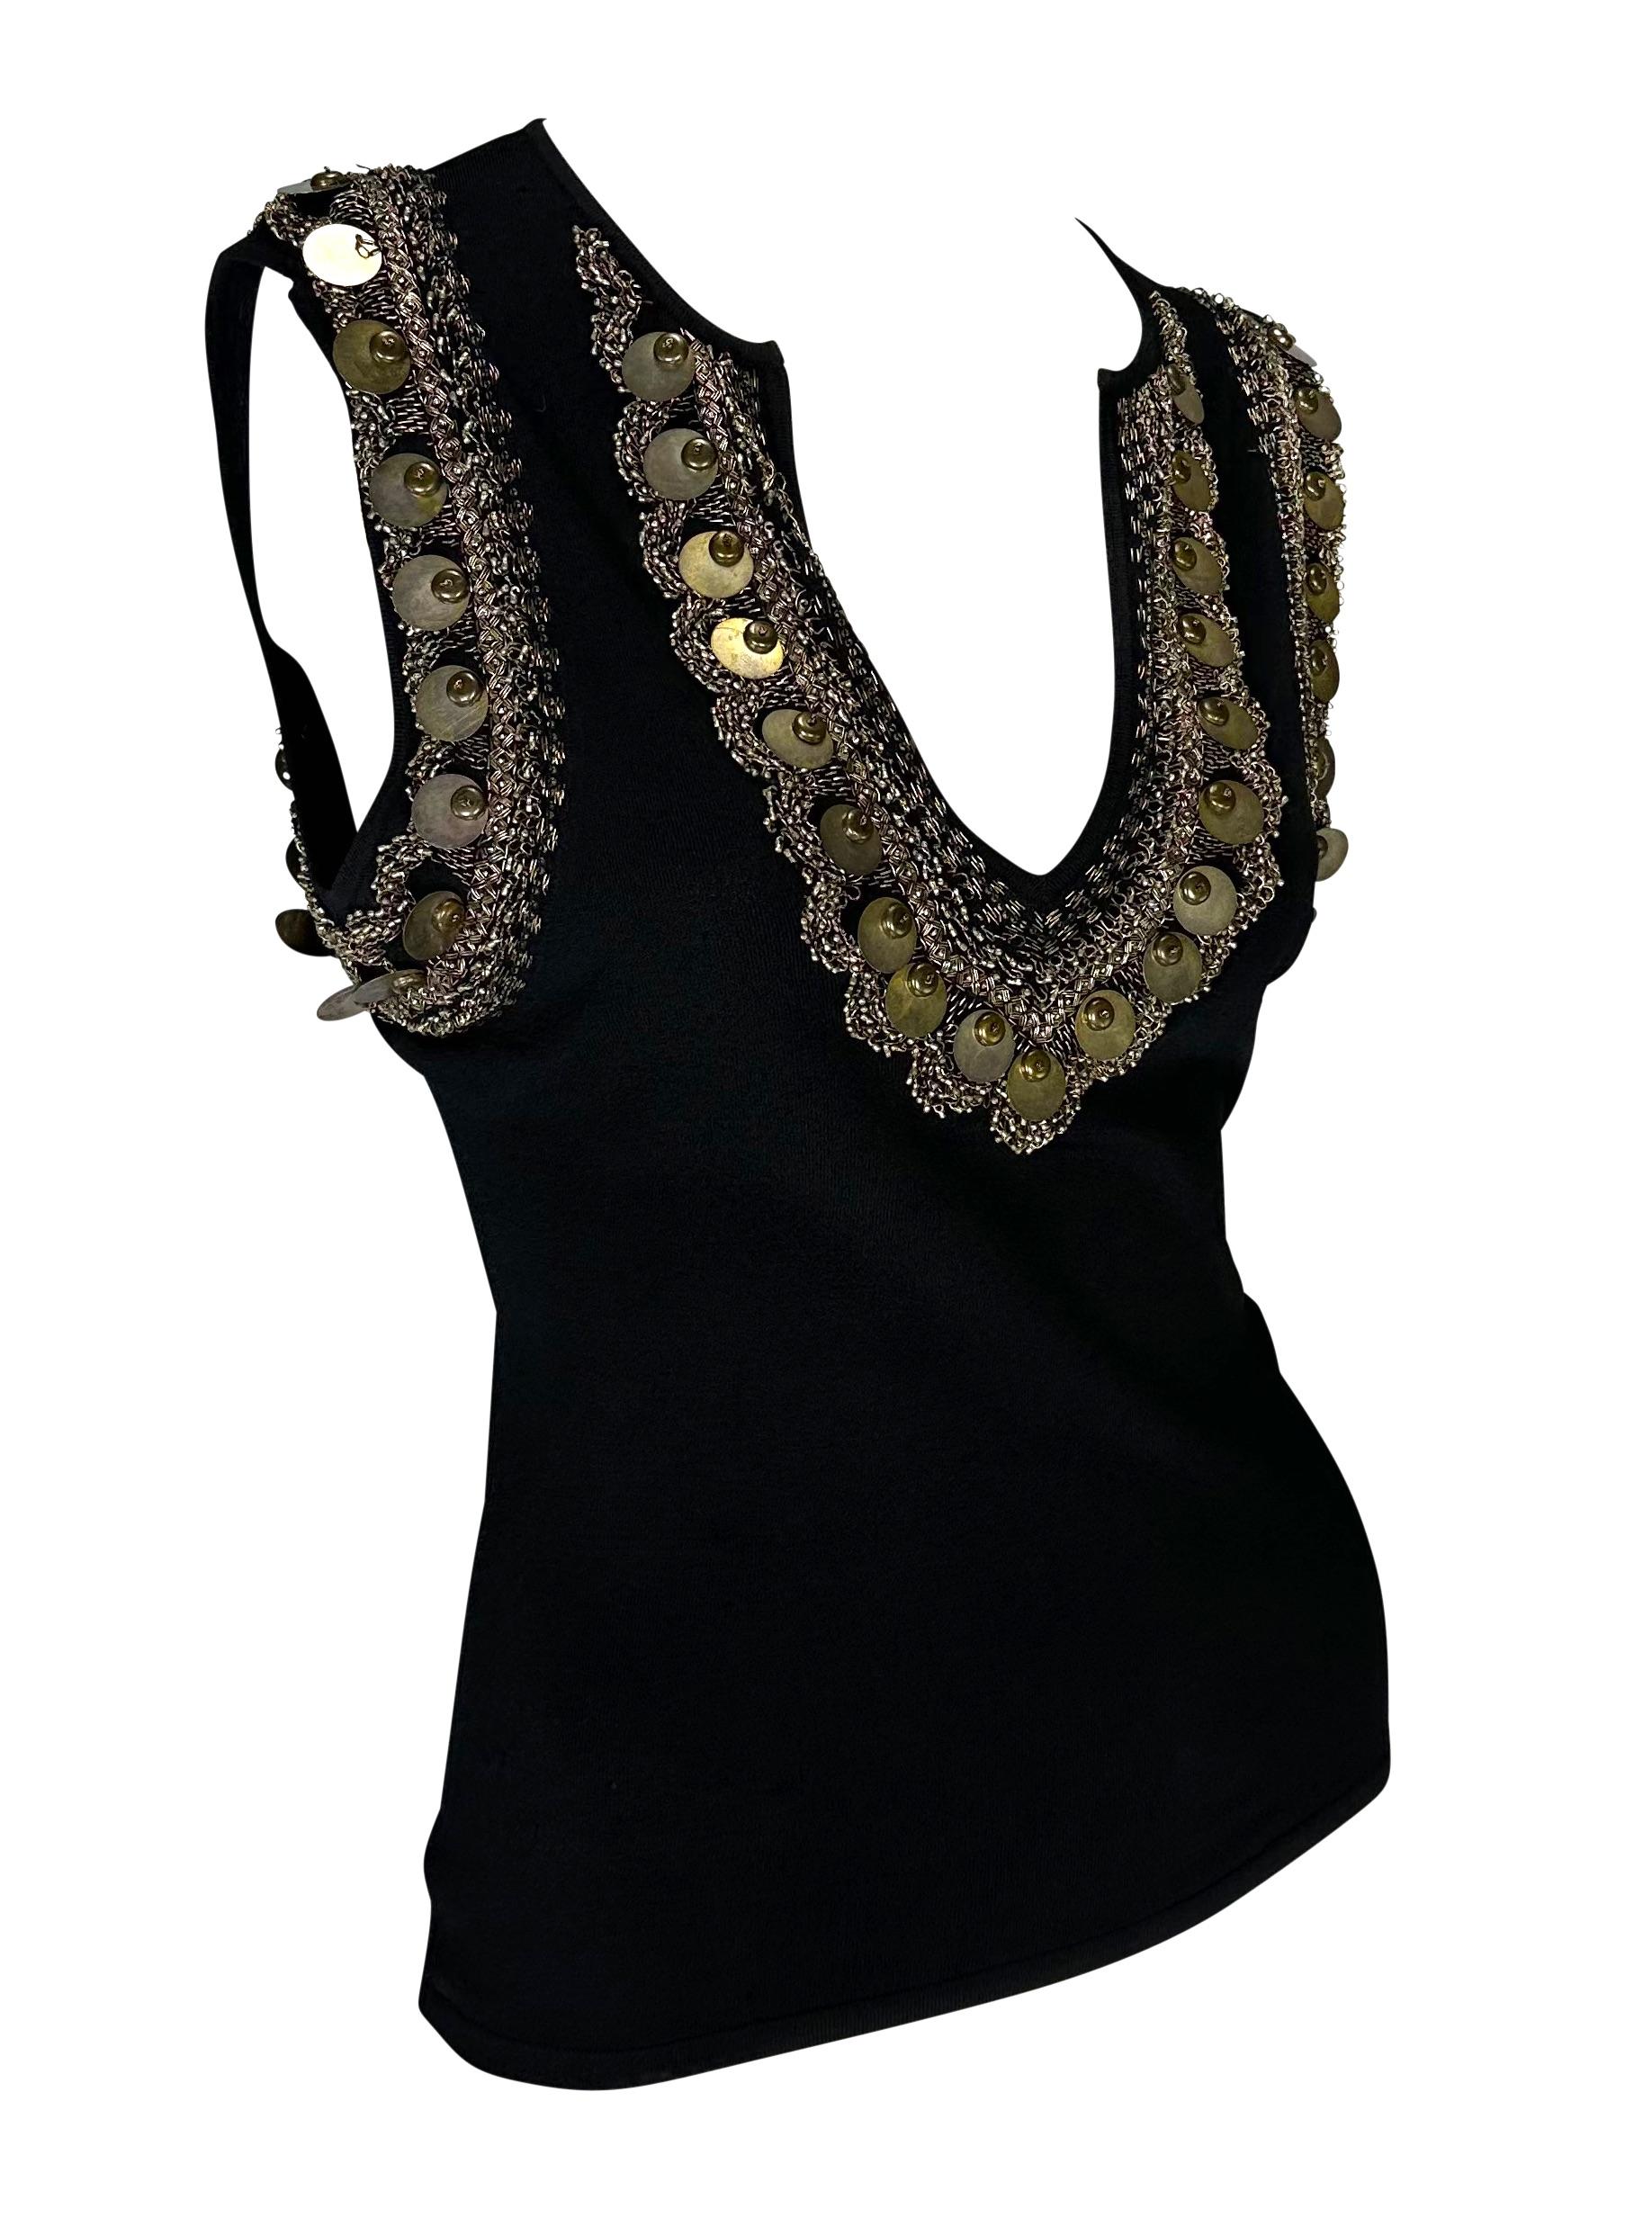 S/S 2004 Versace by Donatella Brass Embroidered Beaded Black Knit Plunging Top For Sale 2